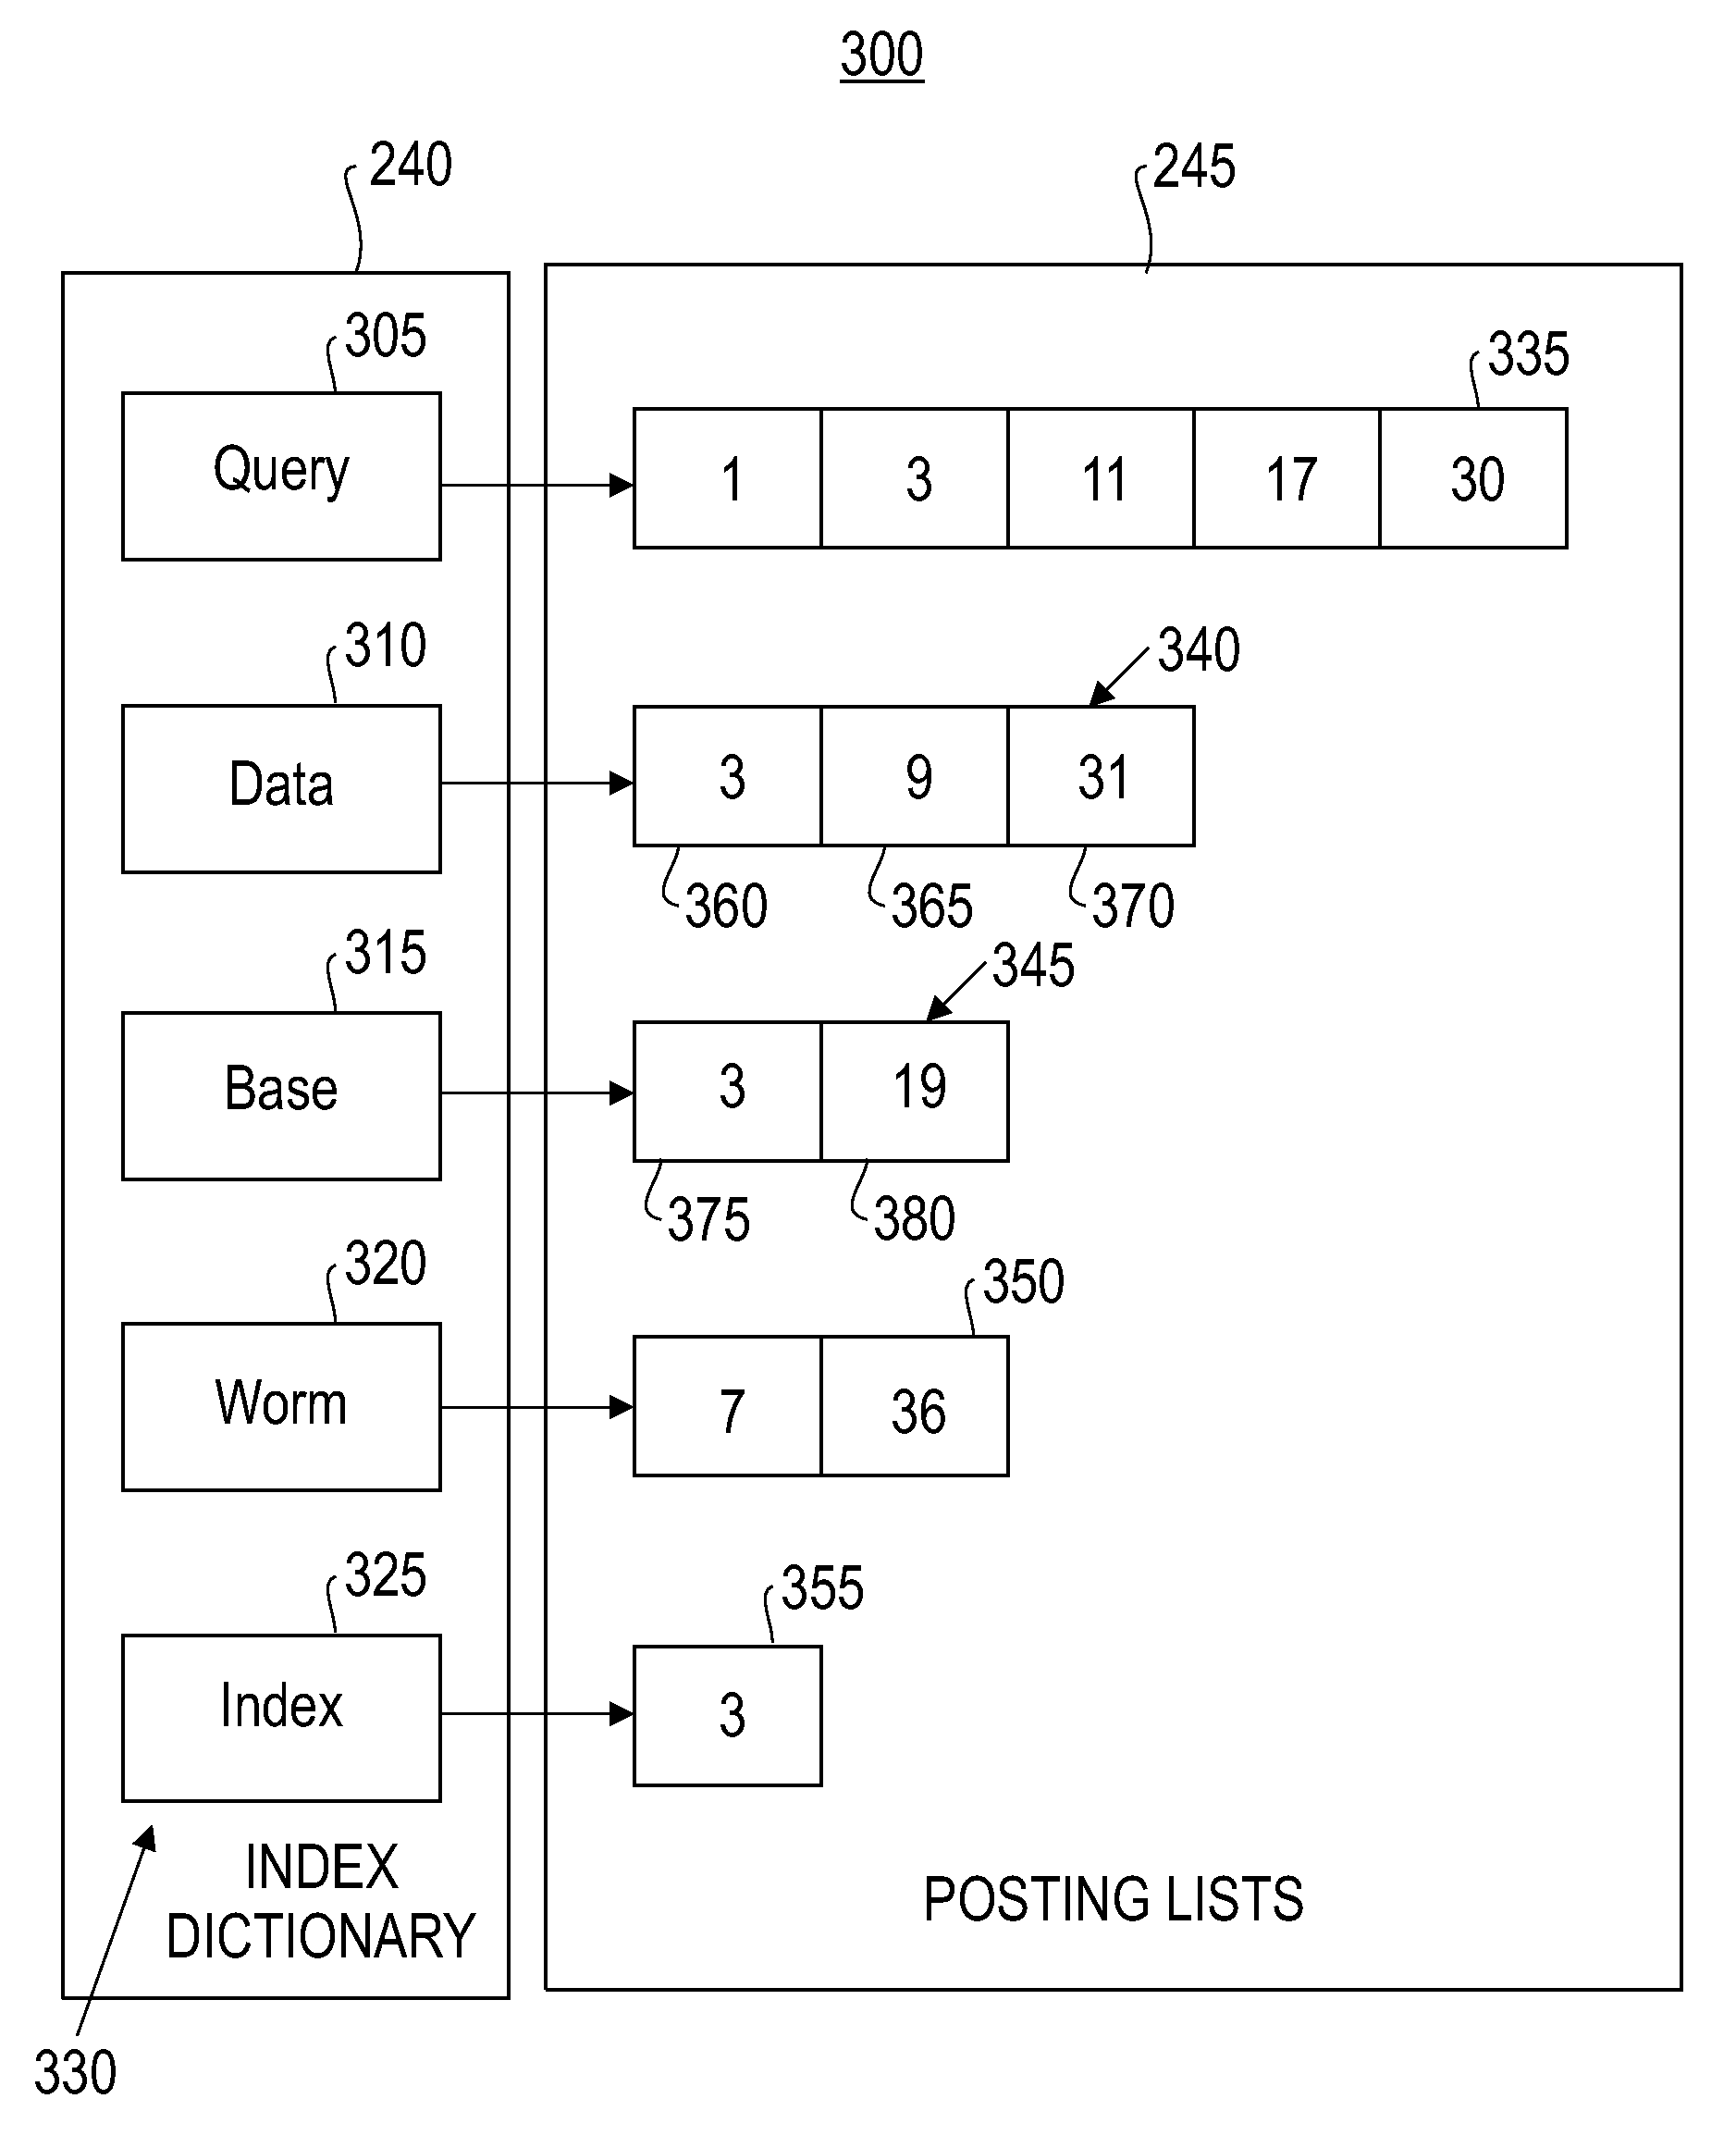 System and Method for Providing a Trustworthy Inverted Index to Enable Searching of Records